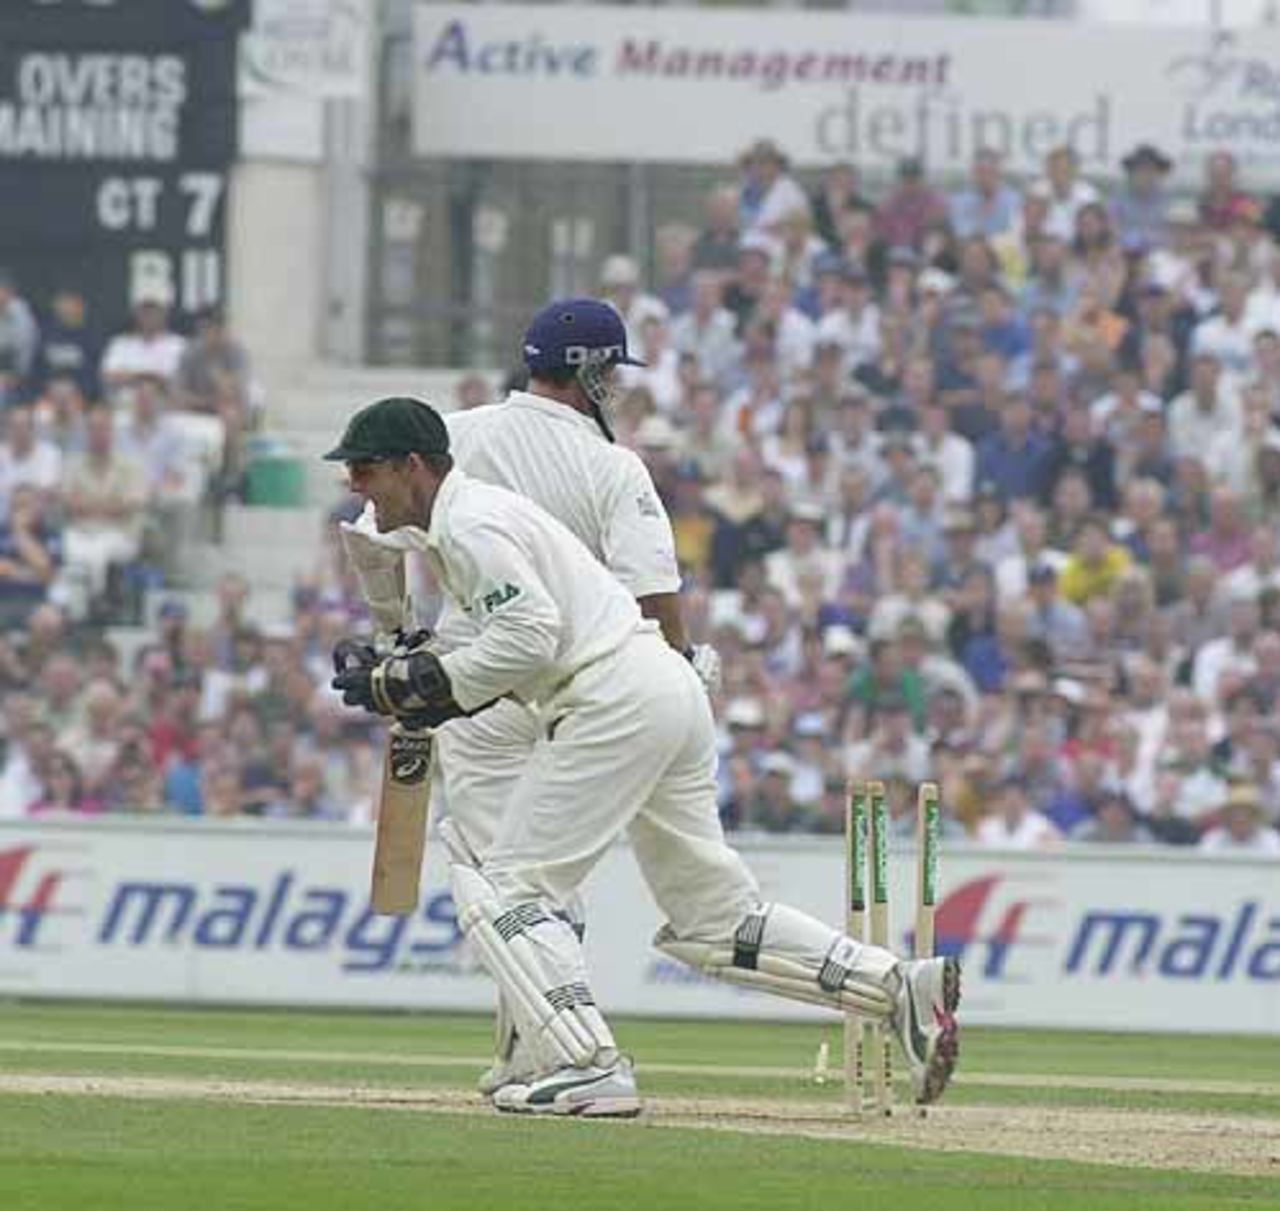 Darren Gough is stumped by Gilchrist to end the England first innings, fifth npower Test, Day 4, The Oval, 26 August 2001